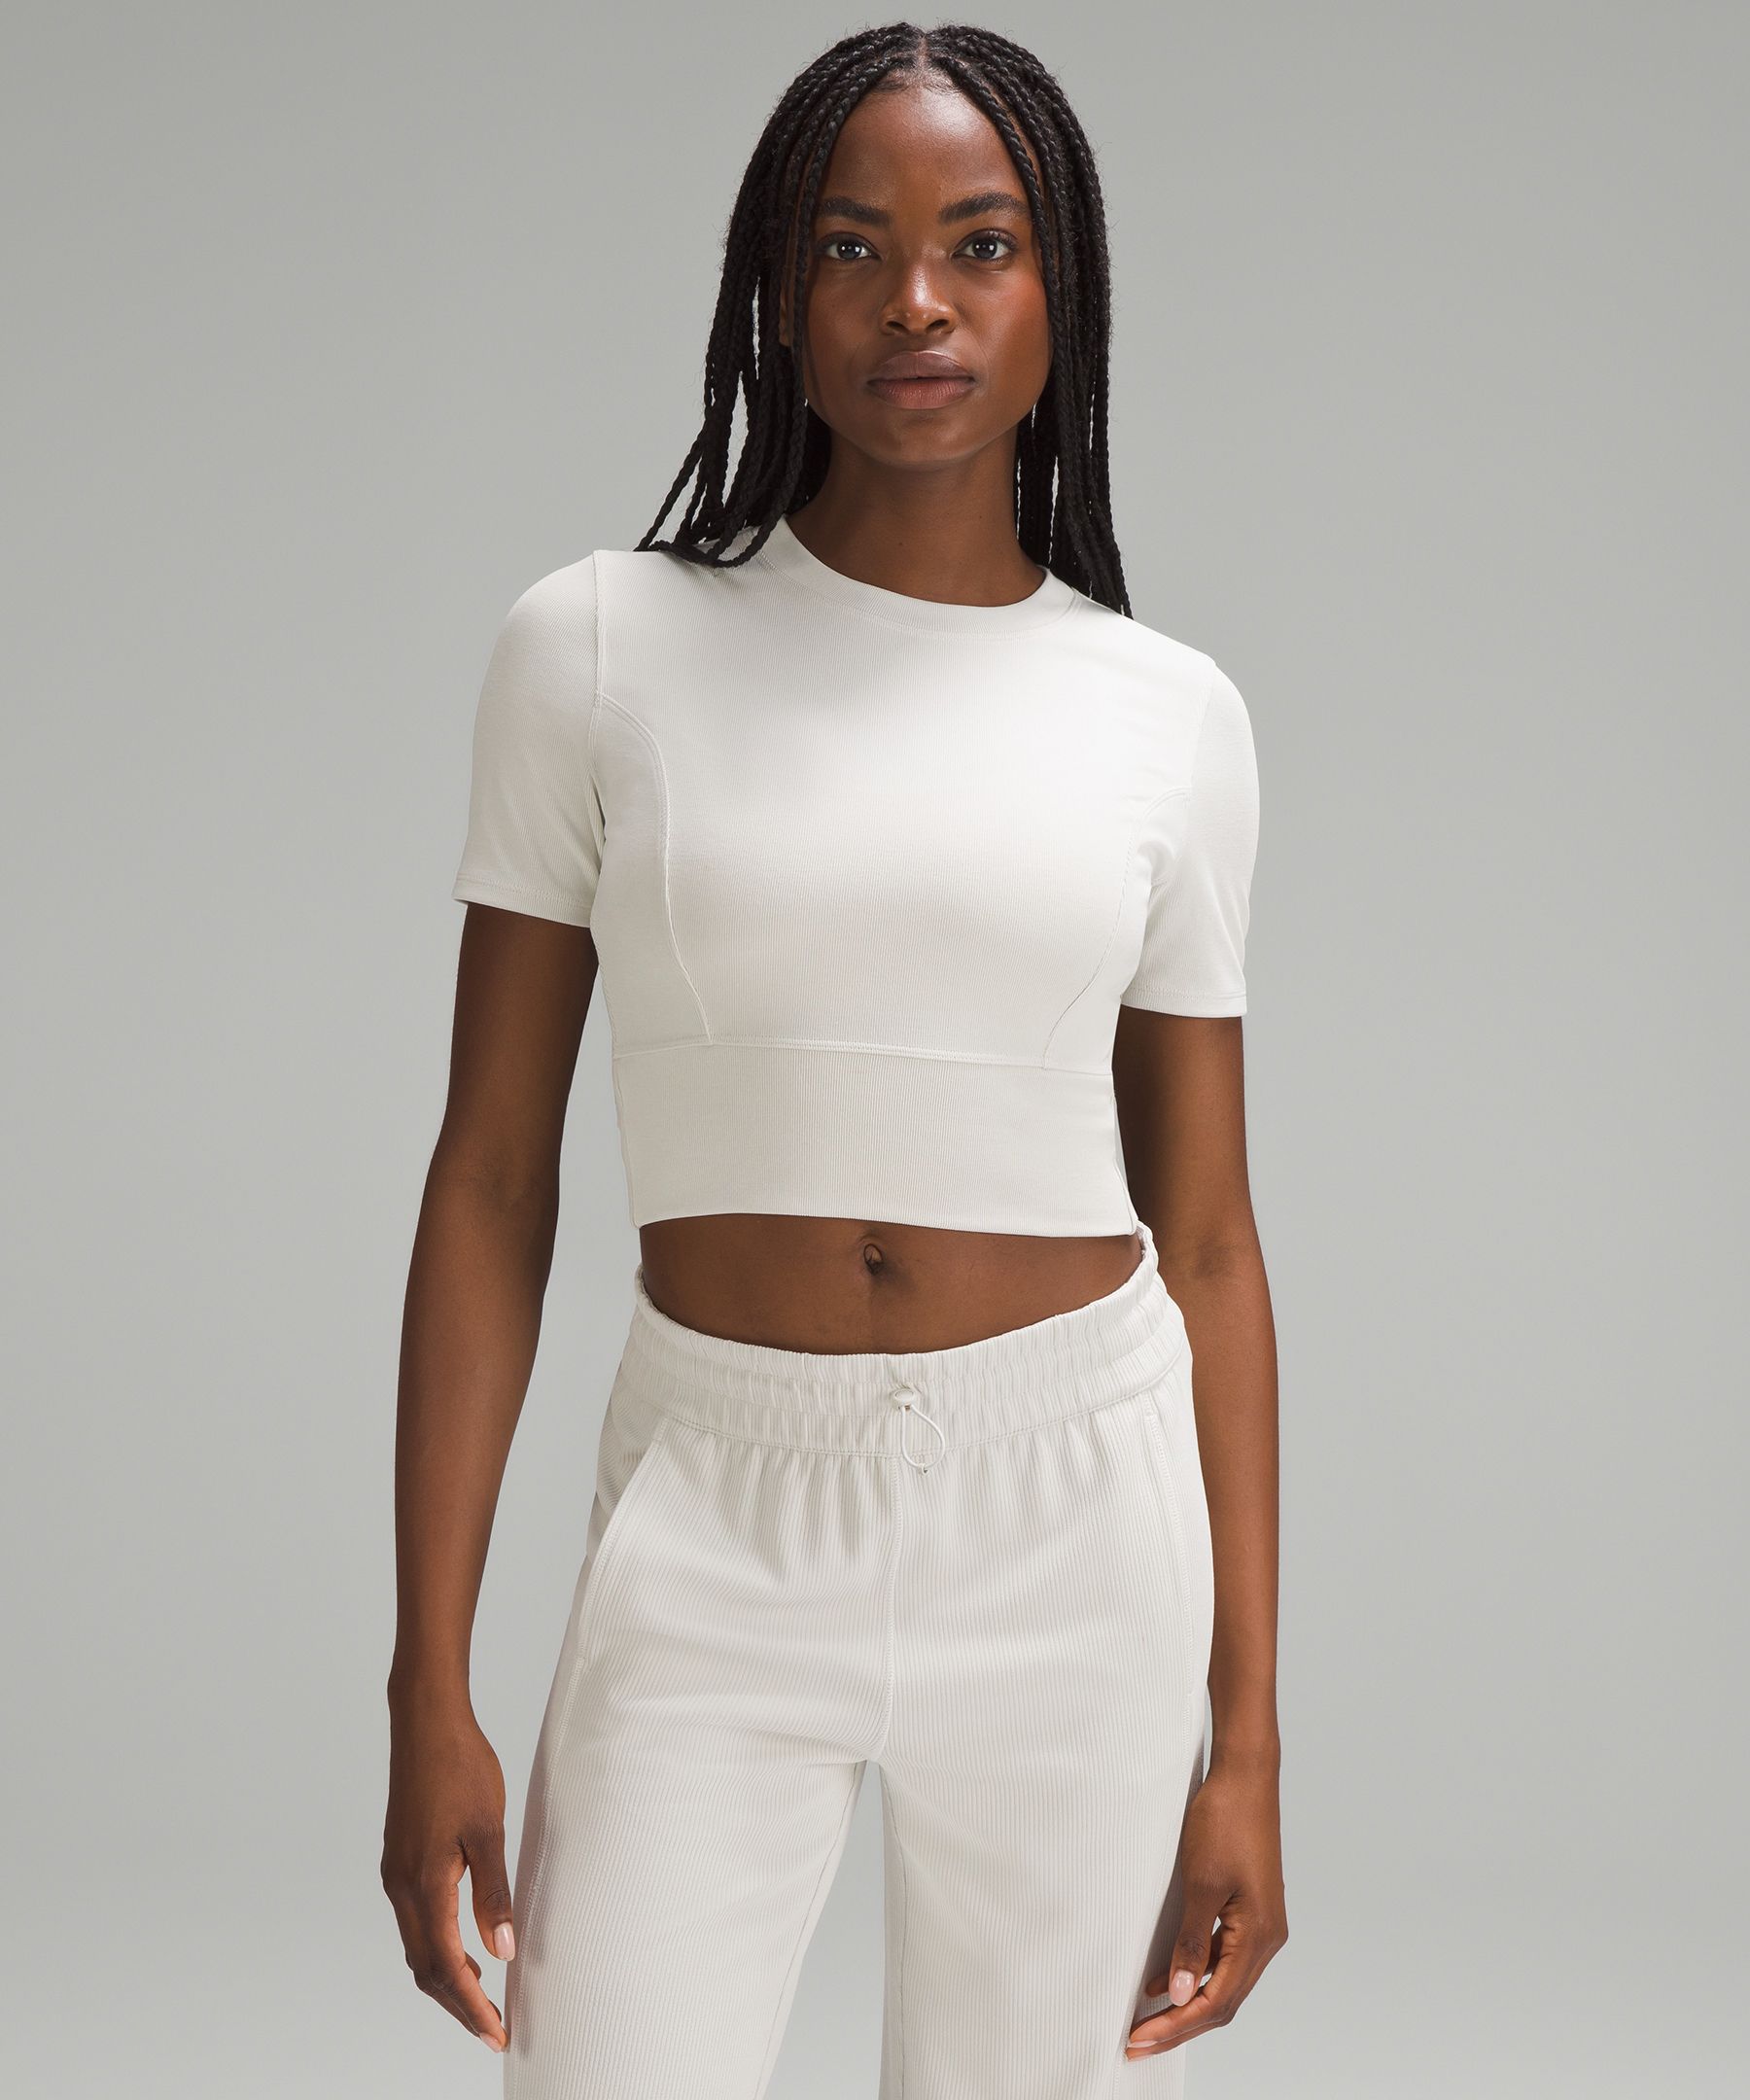 White Ribbed Top - Cutout Top - Short Sleeve Top - Lulus